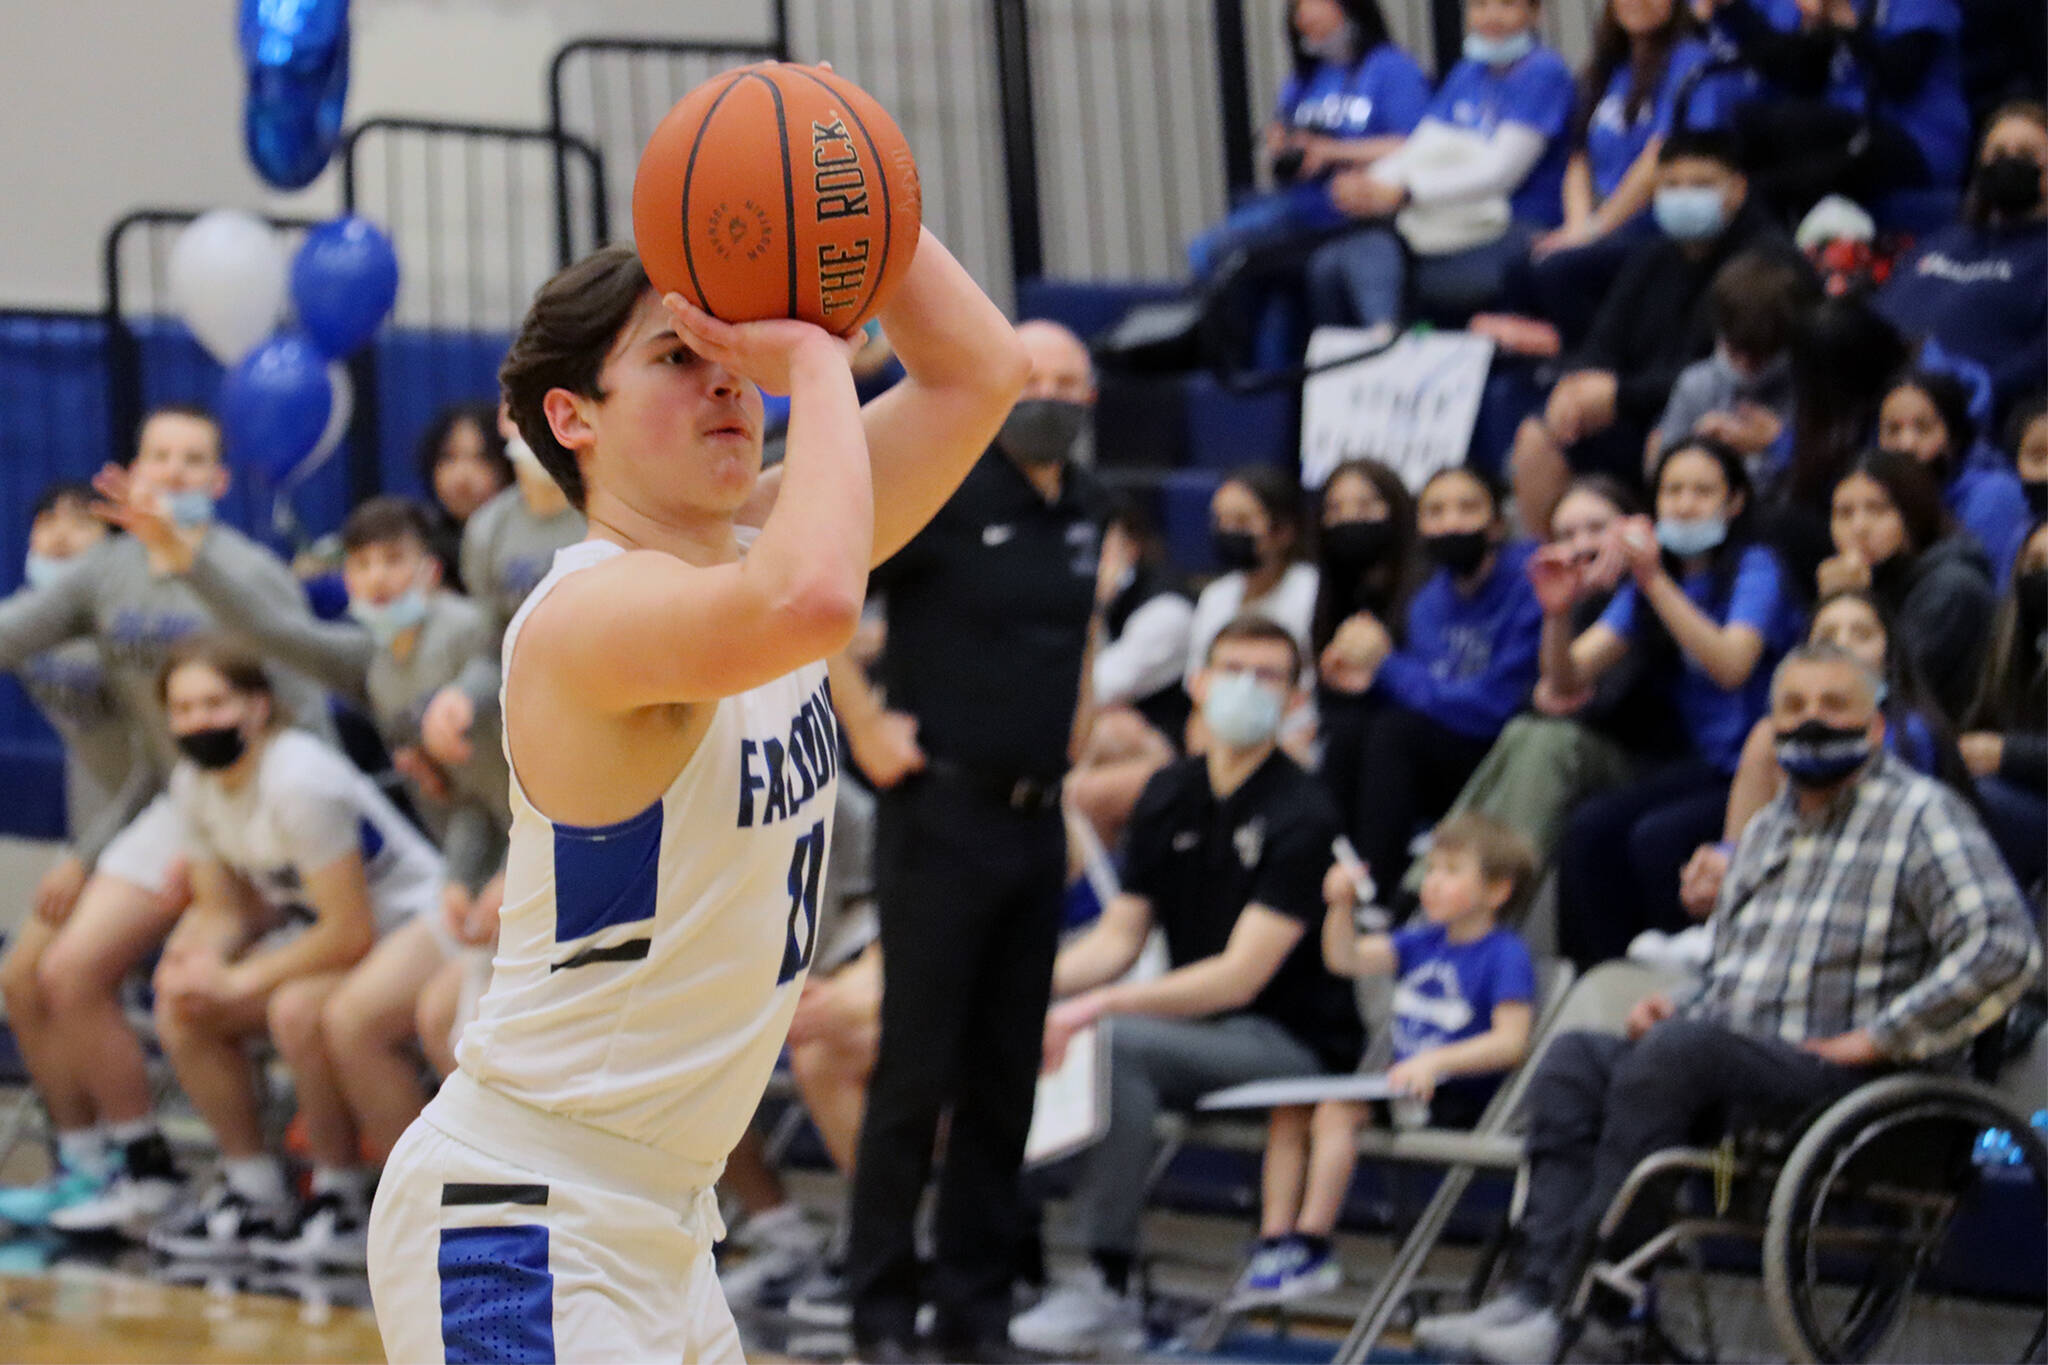 Ben Hohenstatt / Juneau Empire
Senior Matthew Hartsock prepares to launch a 3-point shot while his teammates and coaches look on. Hartsock, who sank two 3-pointers in the game, was part of a hot shooting night for TMHS.